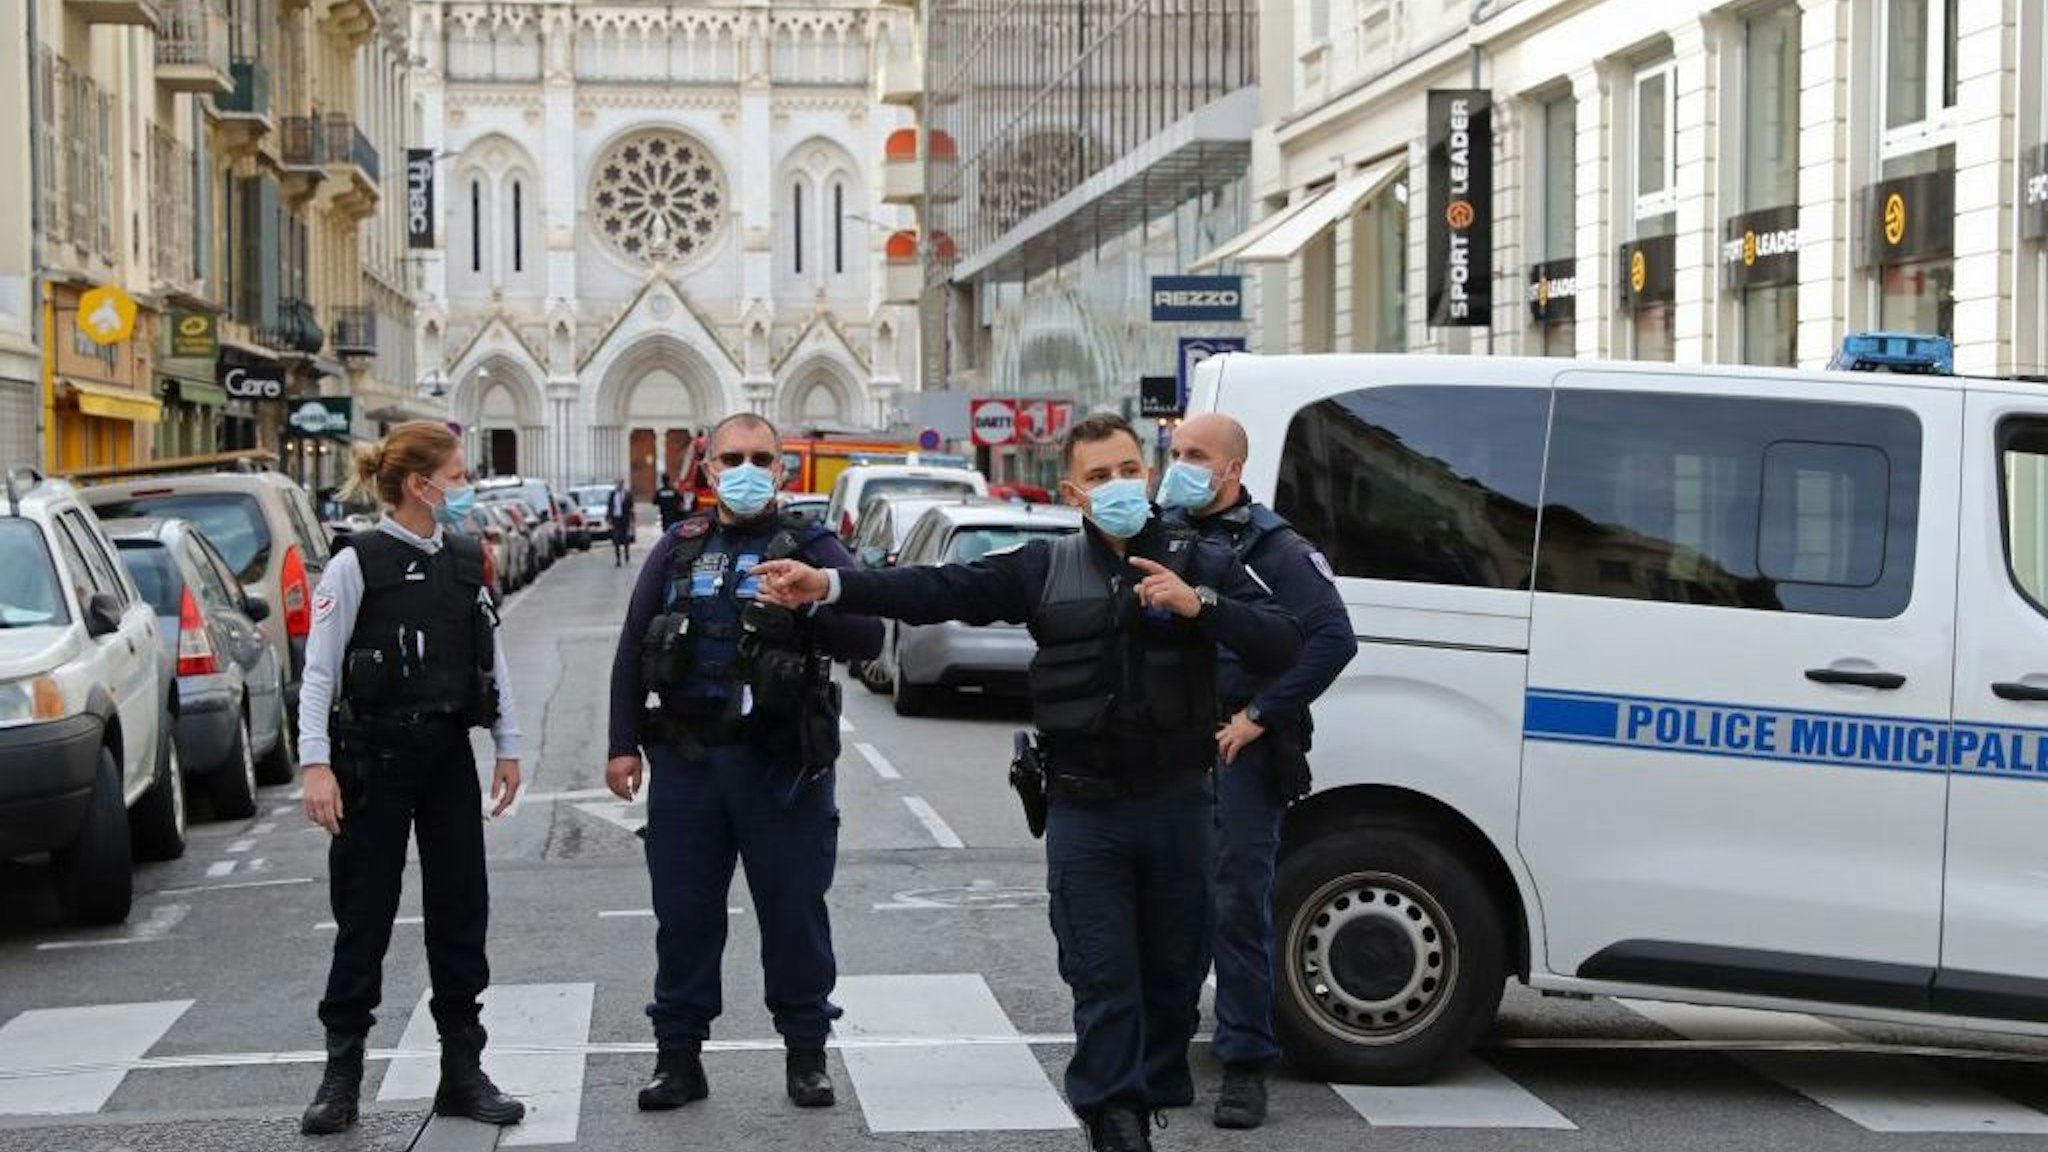 French policemen stand guard the street leading to the Basilica of Notre-Dame de Nice after a knife attack in Nice on October 29, 2020. - France's national anti-terror prosecutors said Thursday they have opened a murder inquiry after a man killed three people at a basilica in central Nice and wounded several others. The city's mayor, Christian Estrosi, told journalists at the scene that the assailant, detained shortly afterwards by police, "kept repeating 'Allahu Akbar' (God is Greater) even while under medication." He added that President Emmanuel Macron would be arriving shortly in Nice. (Photo by Valery HACHE / AFP) (Photo by VALERY HACHE/AFP via Getty Images)